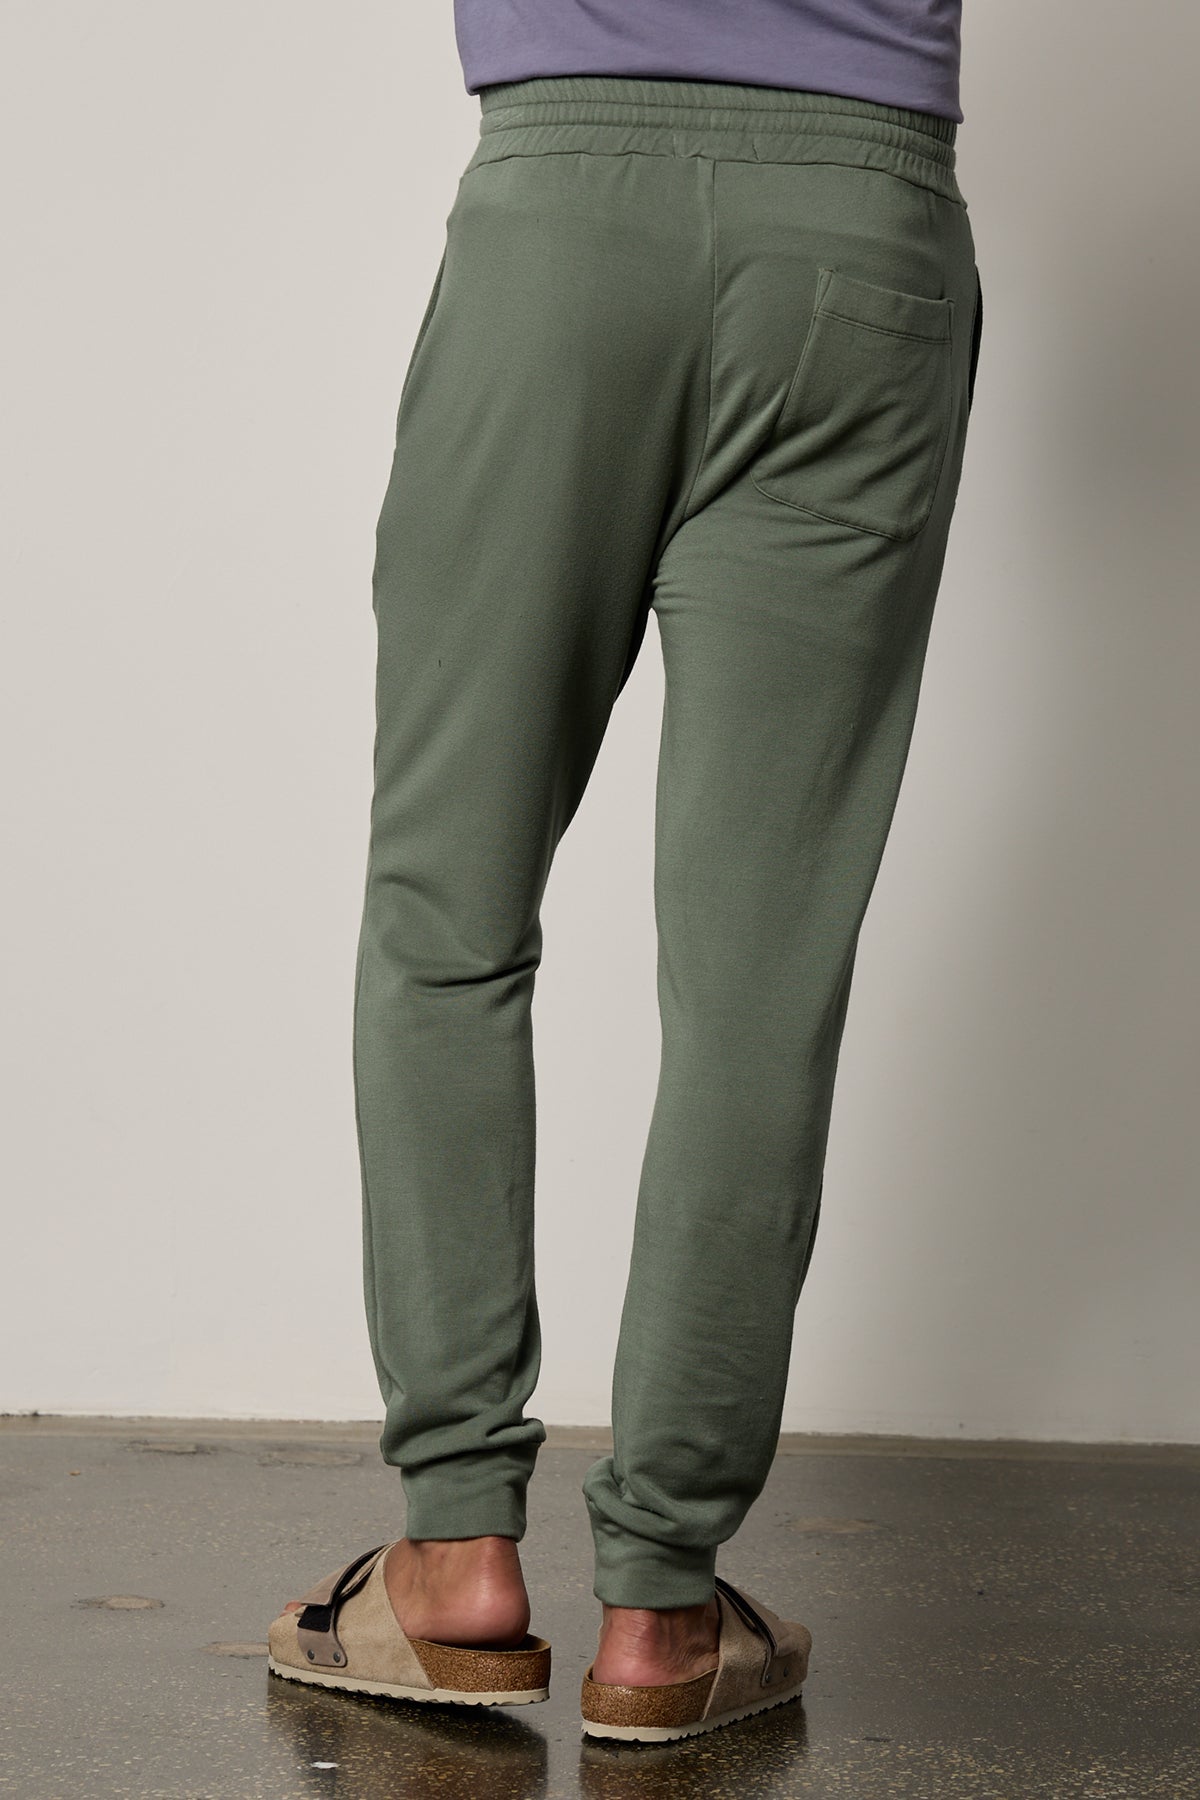   The back view of a man wearing Crosby Luxe Fleece Jogger sweatpants from Velvet by Graham & Spencer, suitable for workouts and made of fleece knit. 